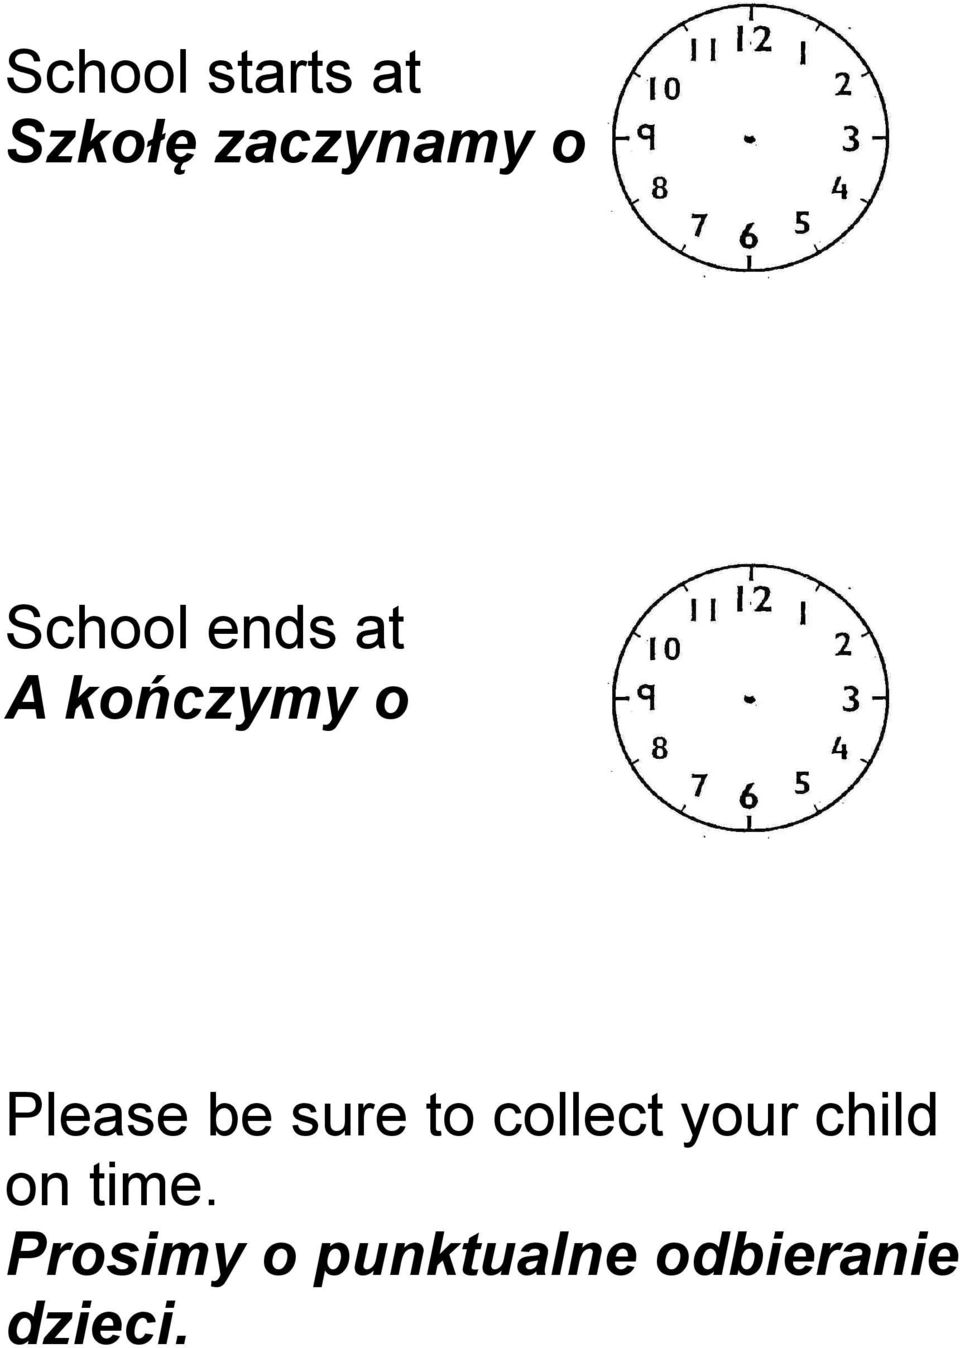 sure to collect your child on time.